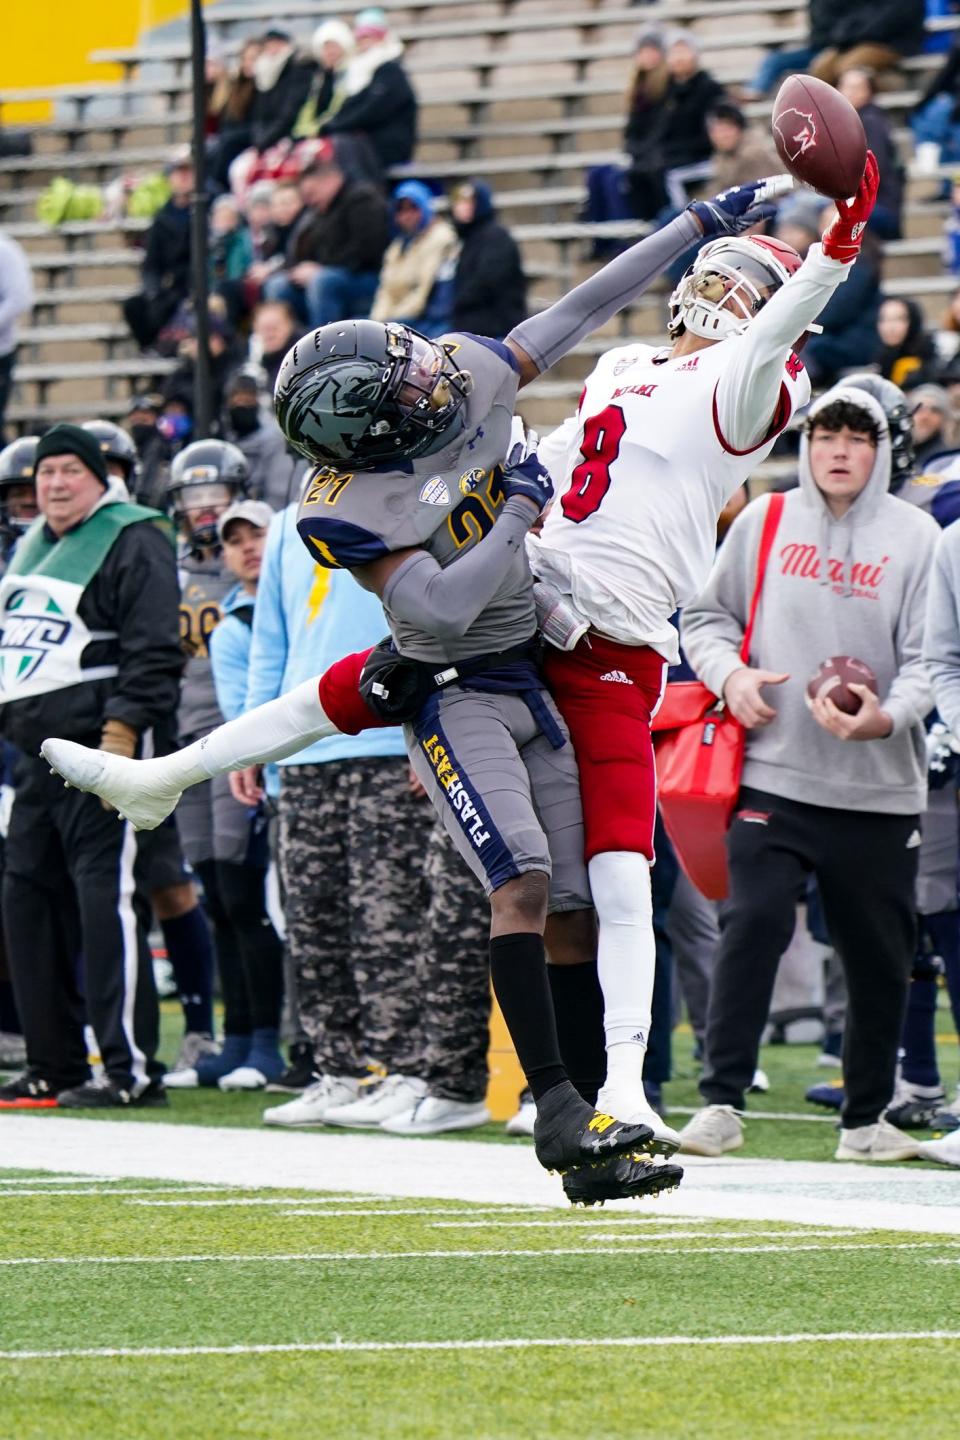 Kent State's Montre Miller breaks up a pass intended for Miami's Mac Hippenhammer on Saturday, November 27, 2021 at Dix Stadium.